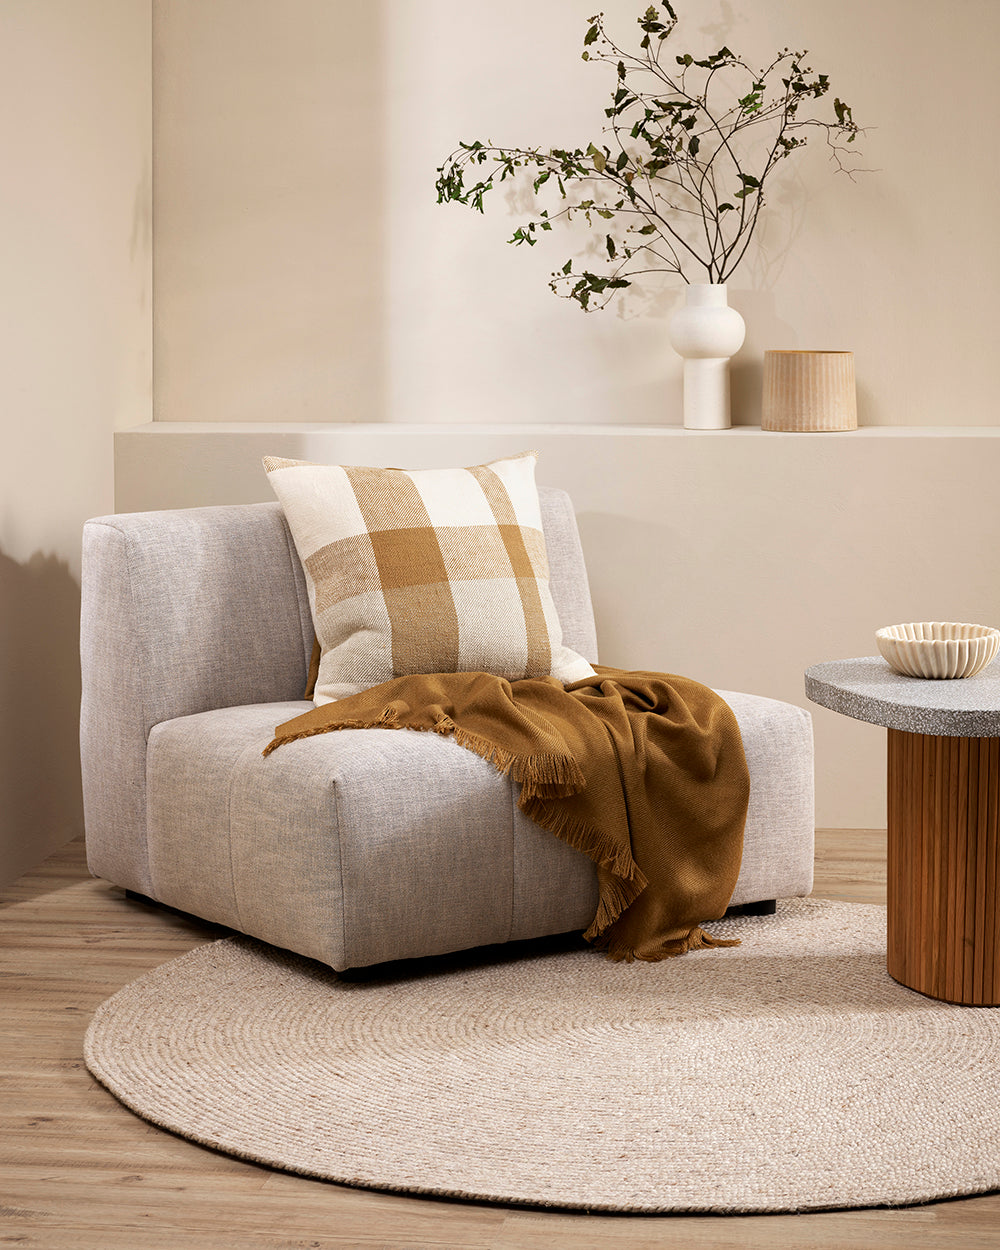 Jefferson cushion cumin on a cream sofa chair with a cumin coloured throw. The room features a low wall behind the sofa chair with a white vase and greenery and a beige coloured smaller vase. Ther eis a round sisal type rug on a wooden floor with a wooden side table and concrete top with a cream ridged bowl on top